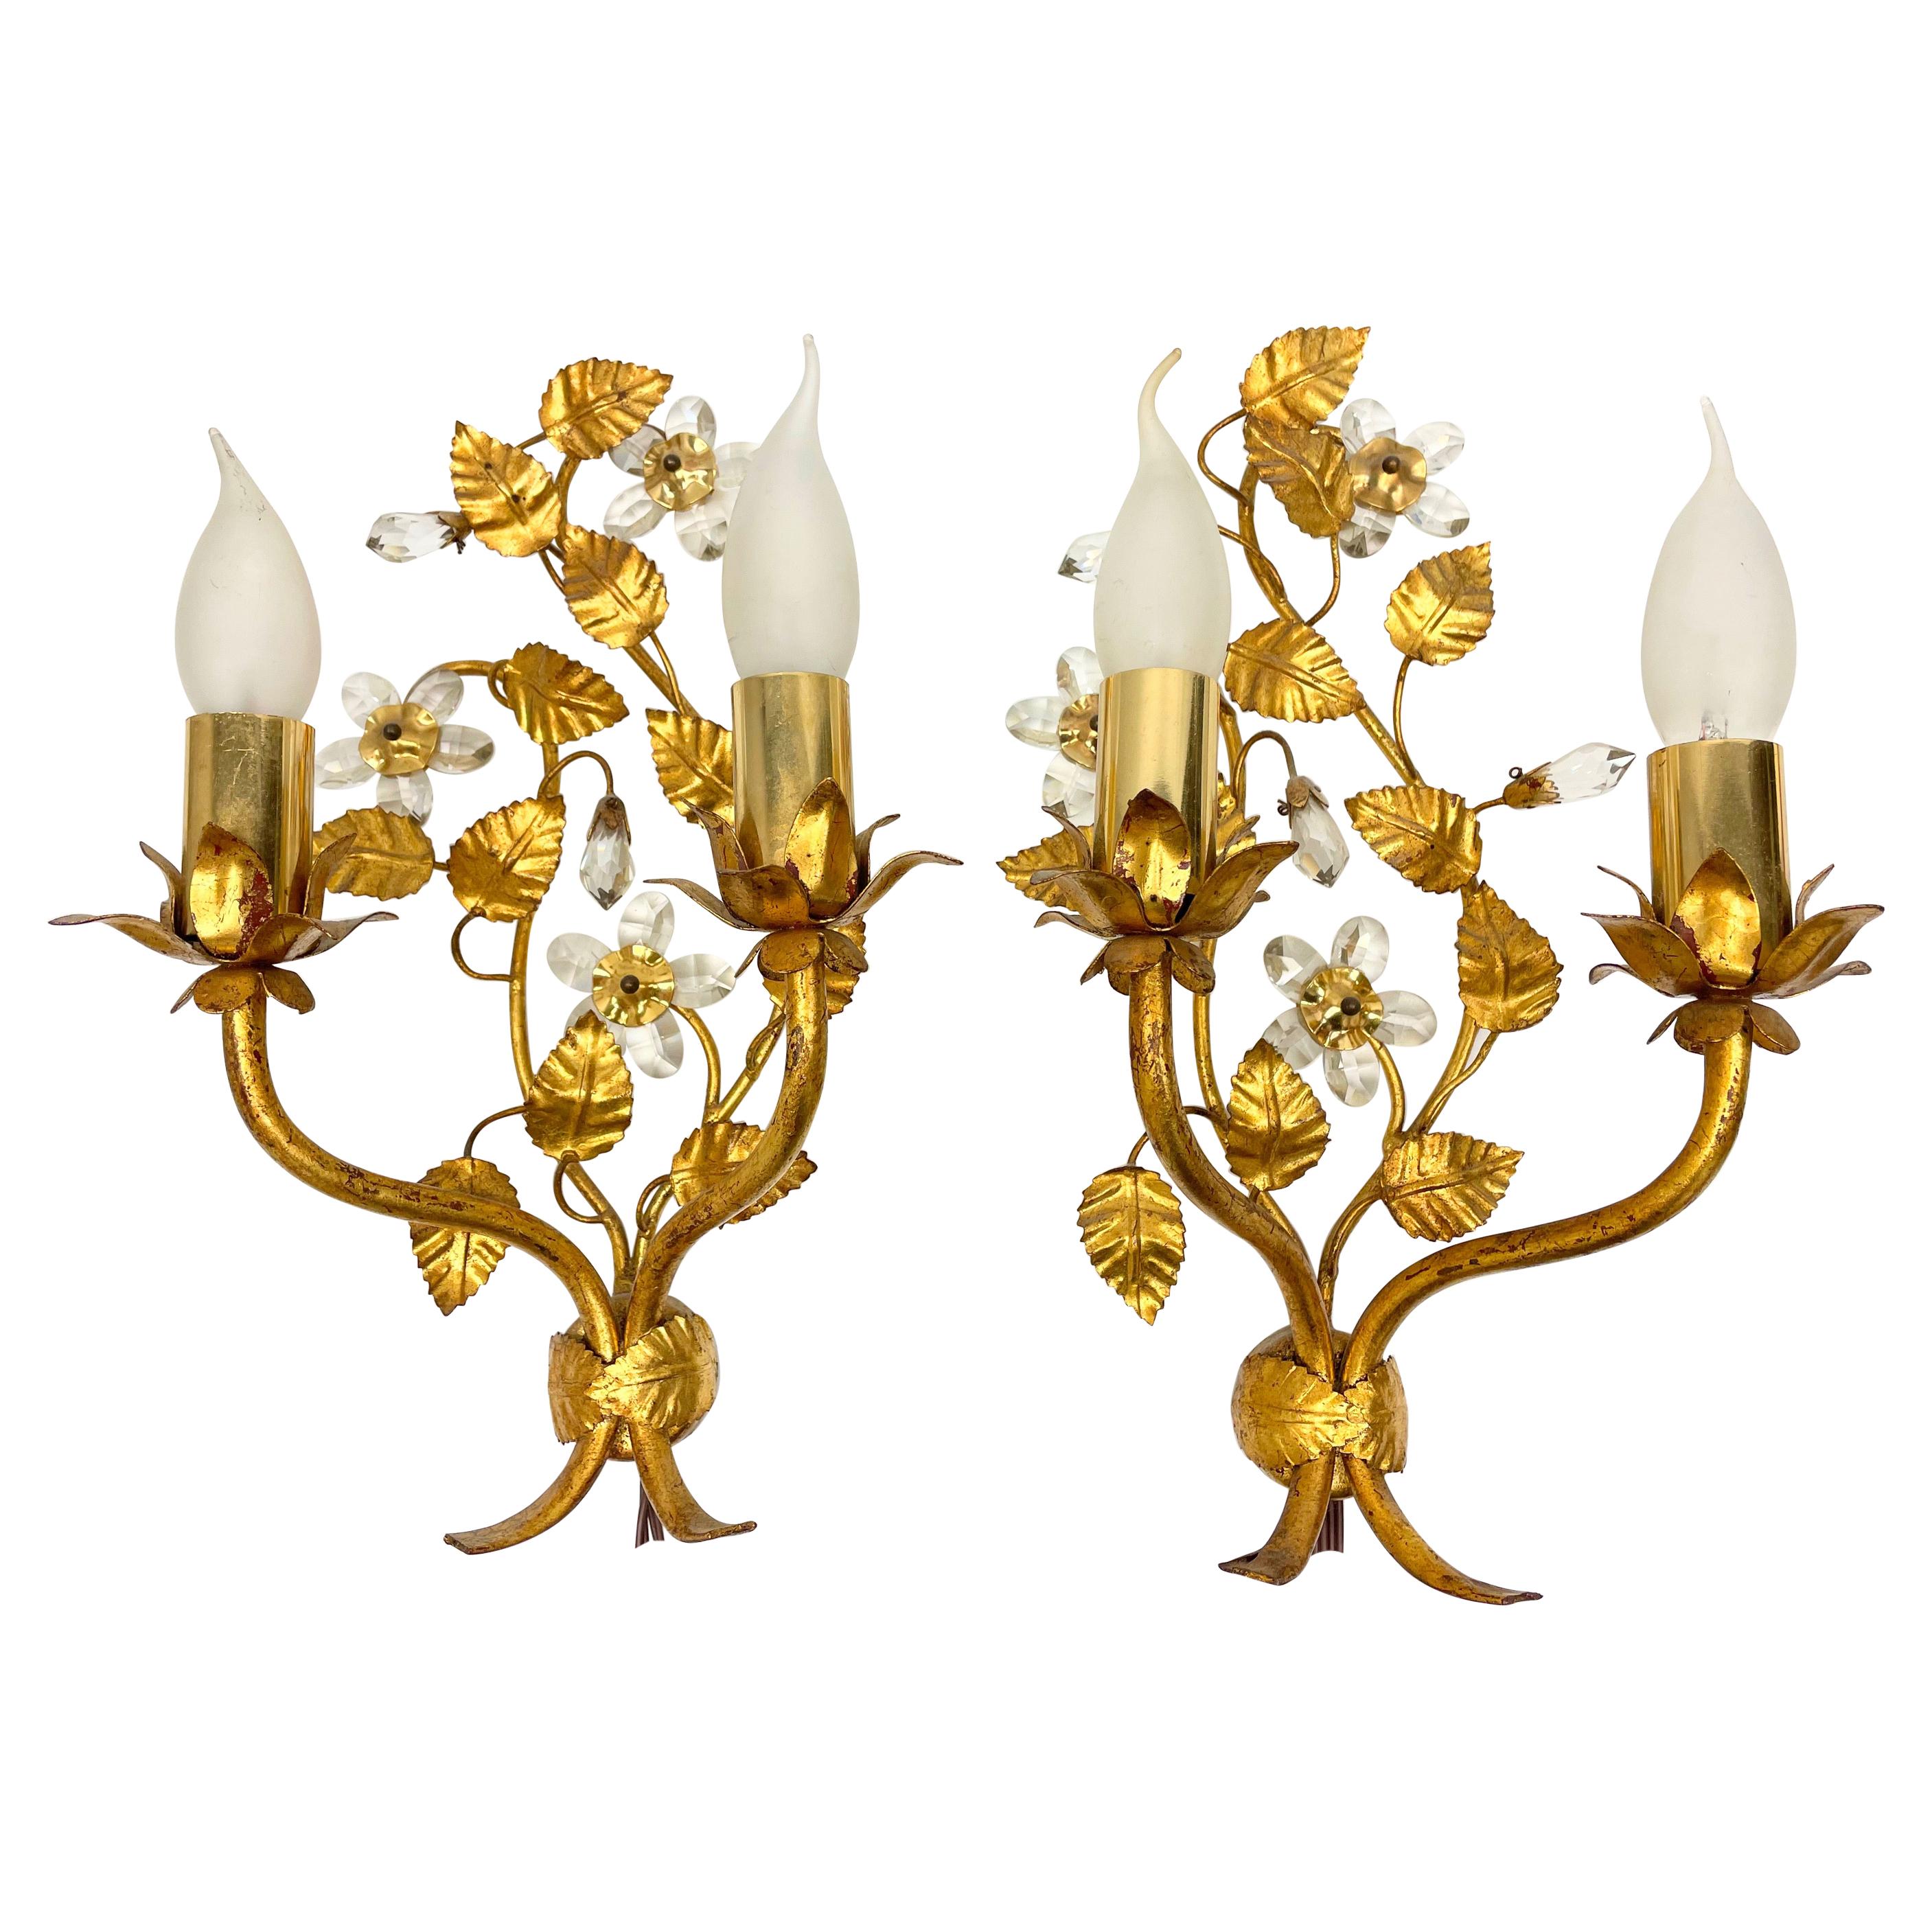 Pair of Italian Crystal Flower Gilt Wall Sconce by Banci Florence, Italy, 1950s